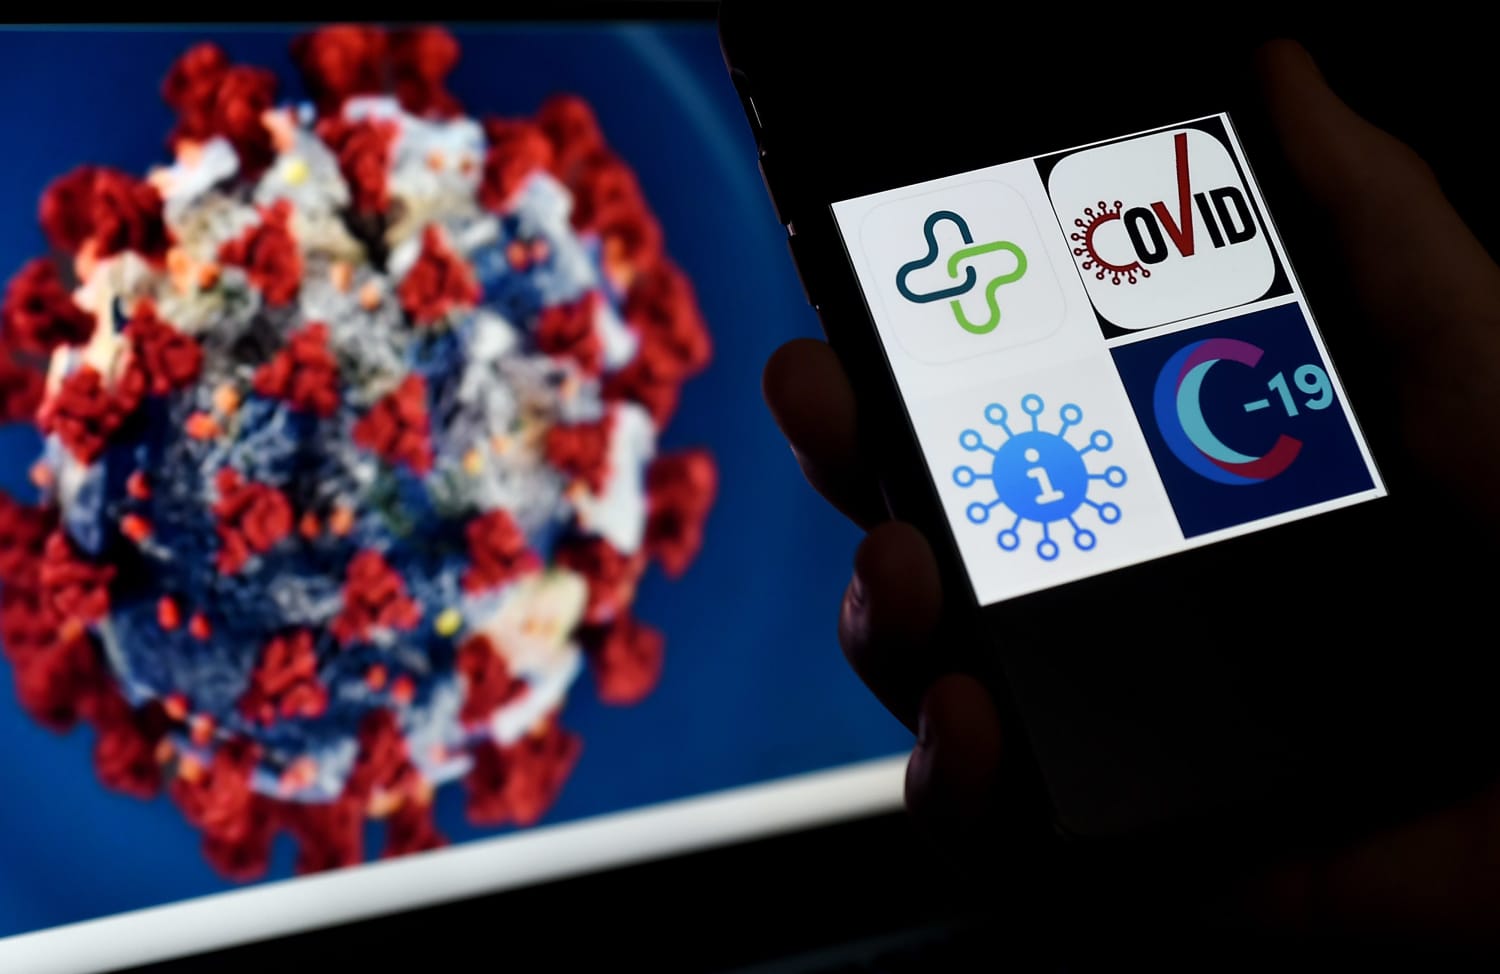 Apple and Google team up to track spread of coronavirus using iPhone and Android apps